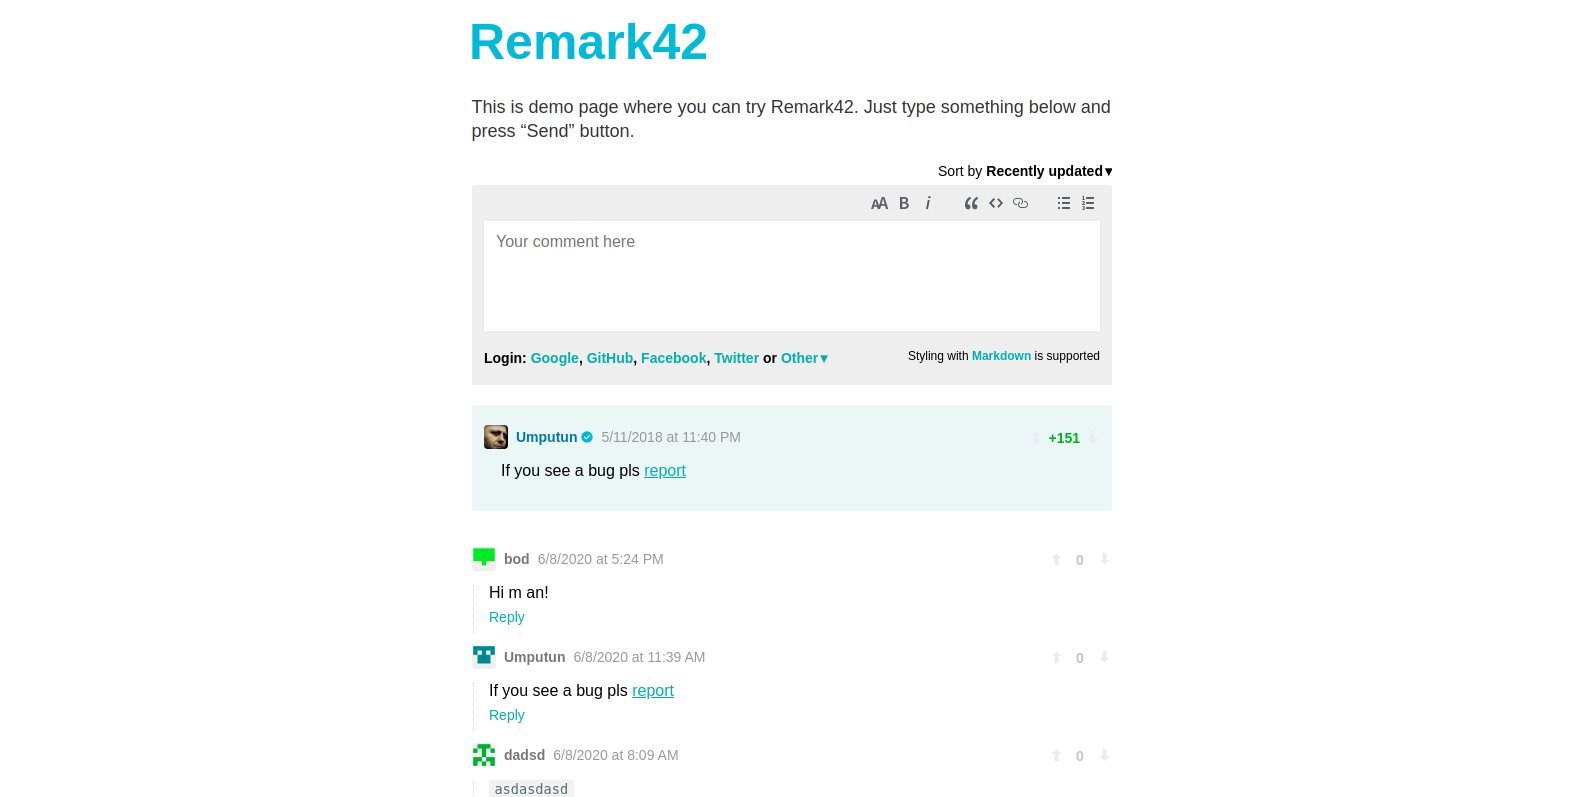 Remark42 example comment section